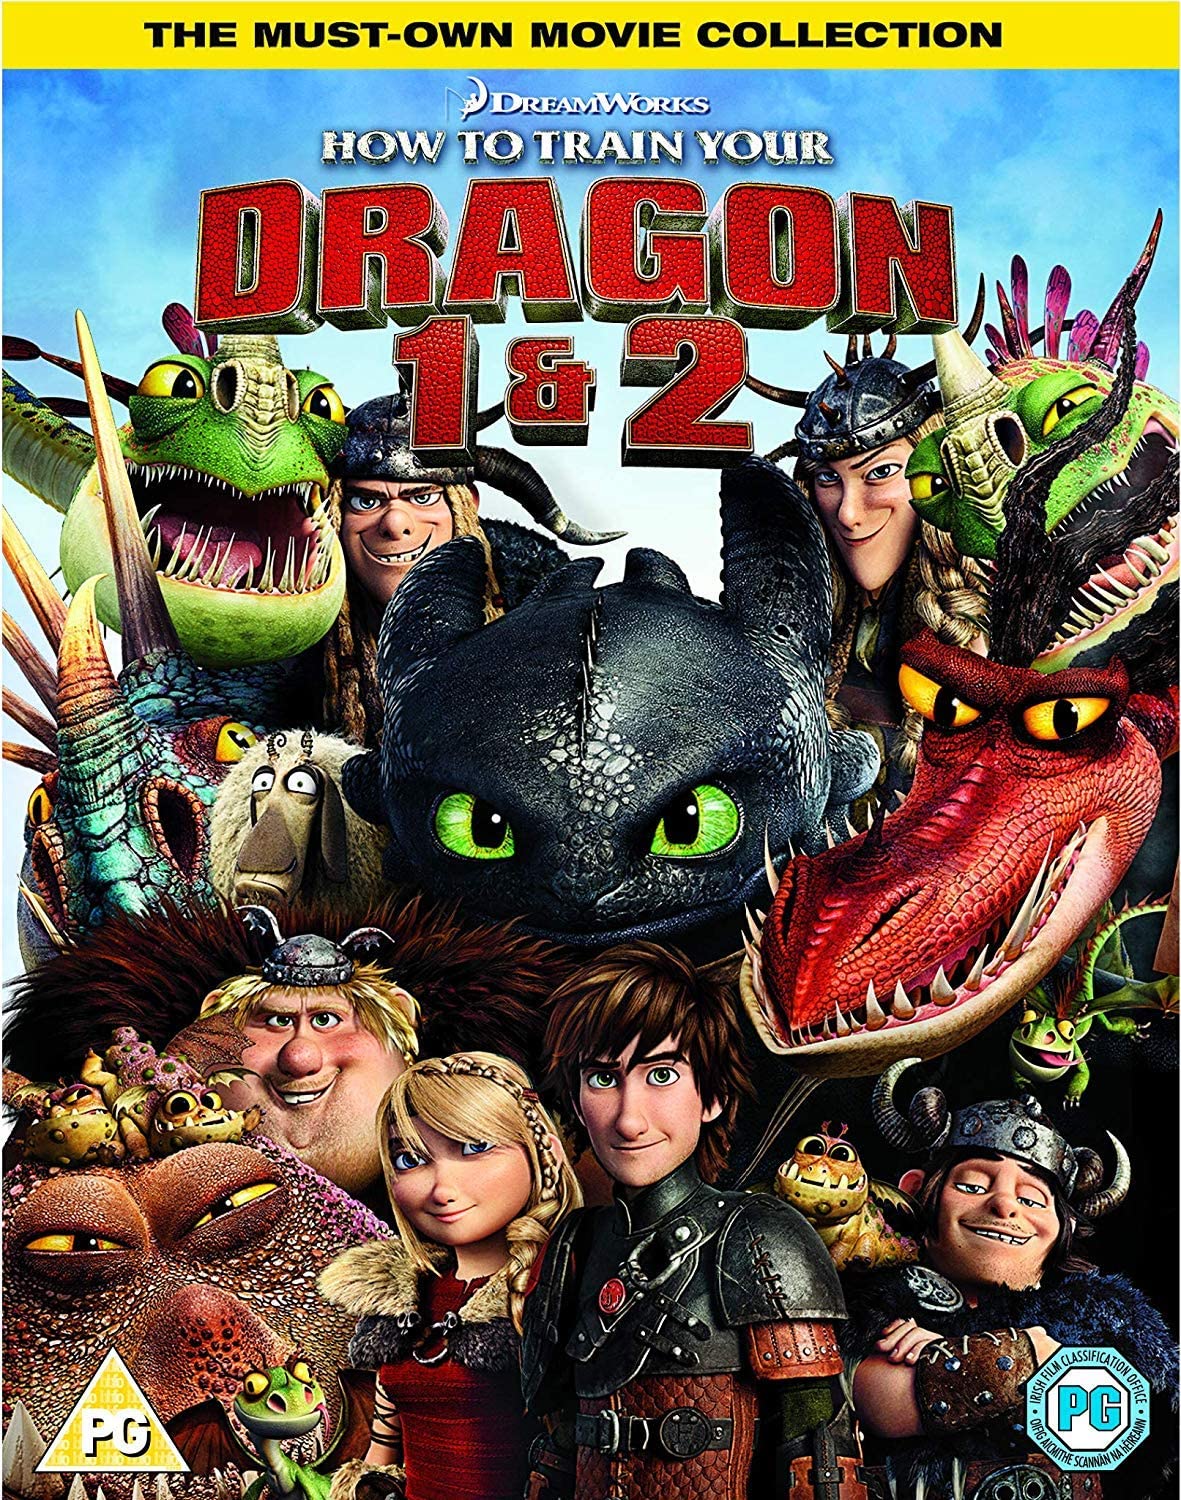 How To Train Your Dragon: 2 Film Collection (Dreamworks) (DVD)